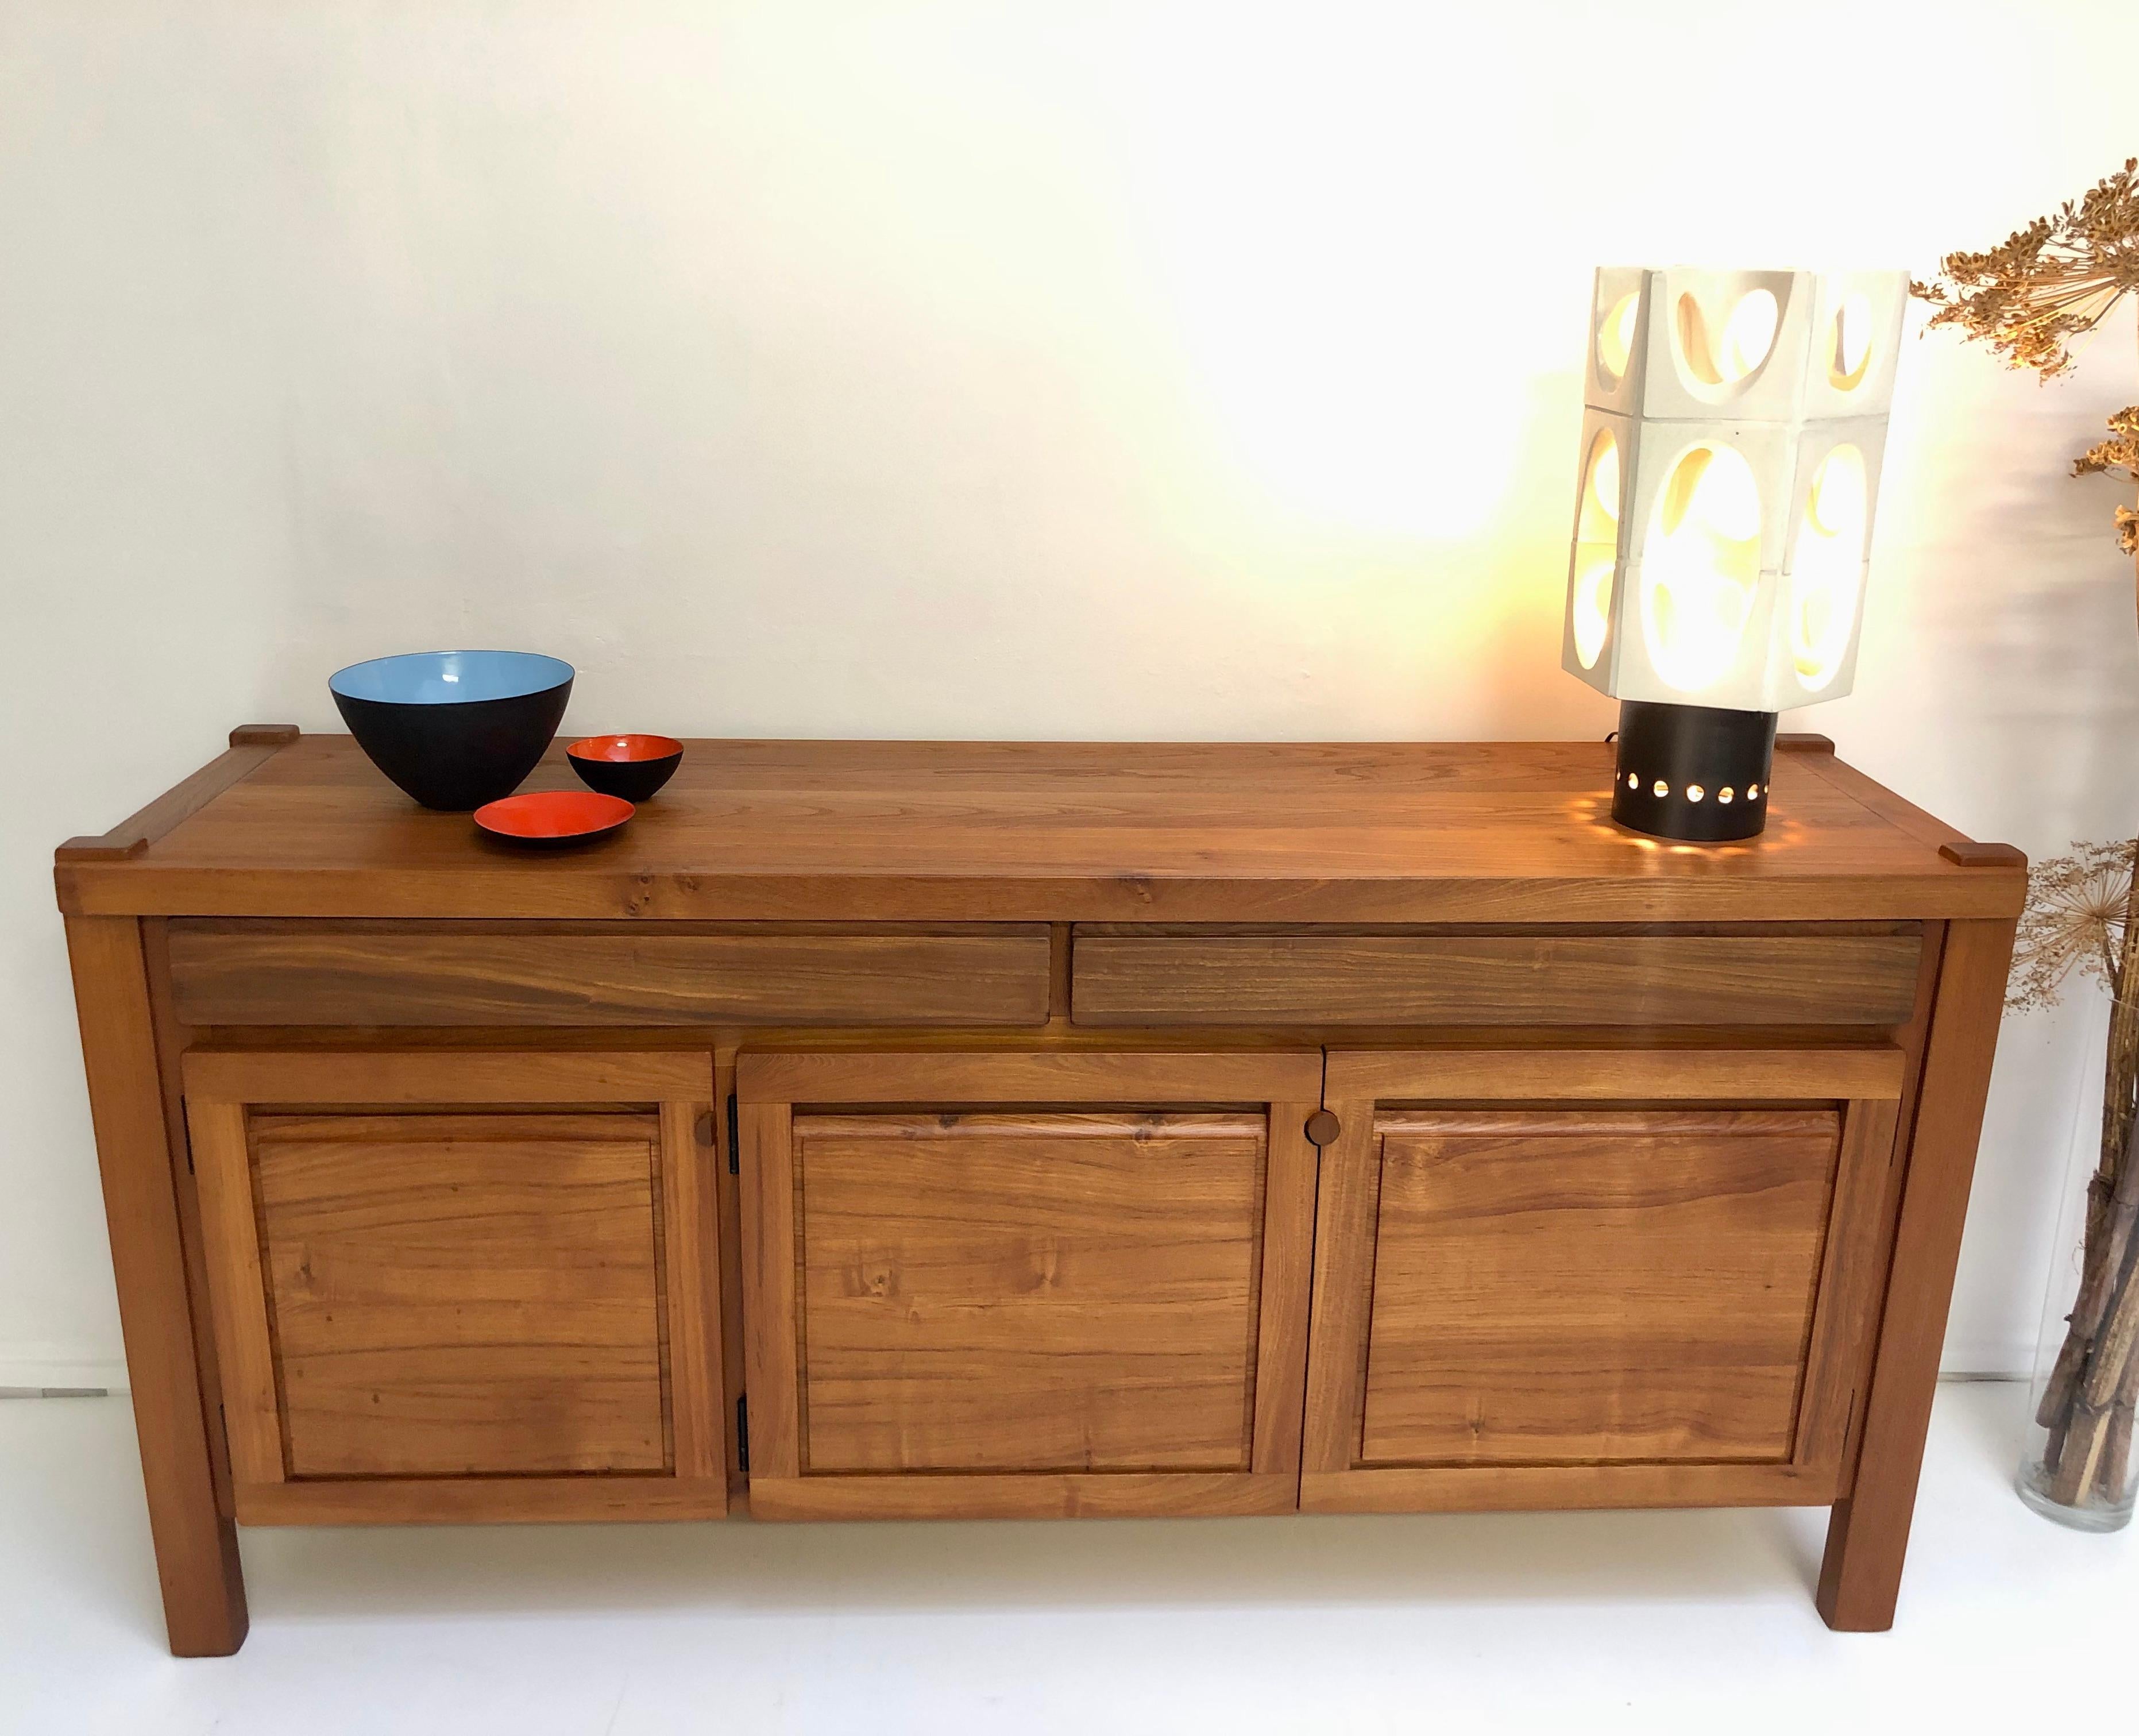 French handcrafted work from the early 1980s, this large buffet combines rusticity and modernity by the essence of warm wood, its minimalist lines and its large storage capacity.

Both massive and design like the creations of Pierre Chapo, it will